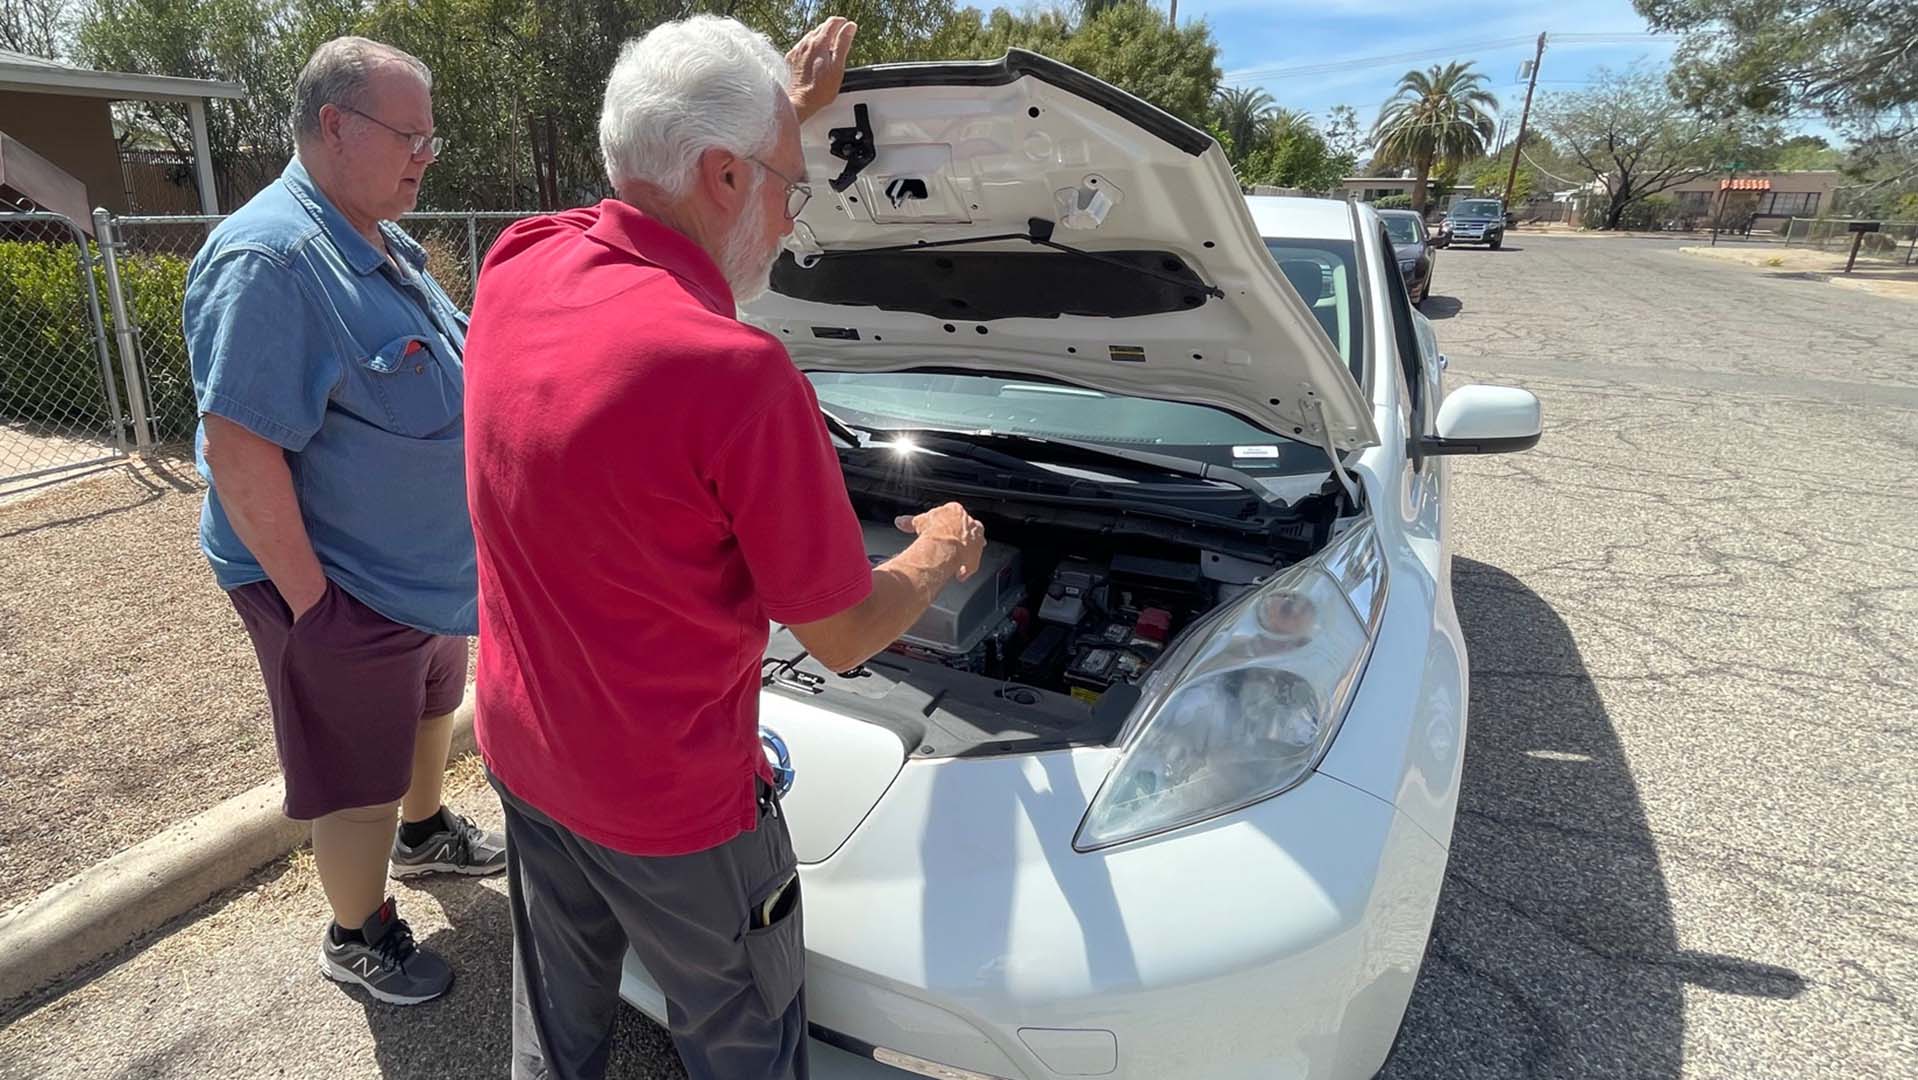 Rush Dougherty looks on as Leaf owner David Gebert checks out his electric car.  Both men are members of TEVA, the Tucson Electric Vehicle Association. 